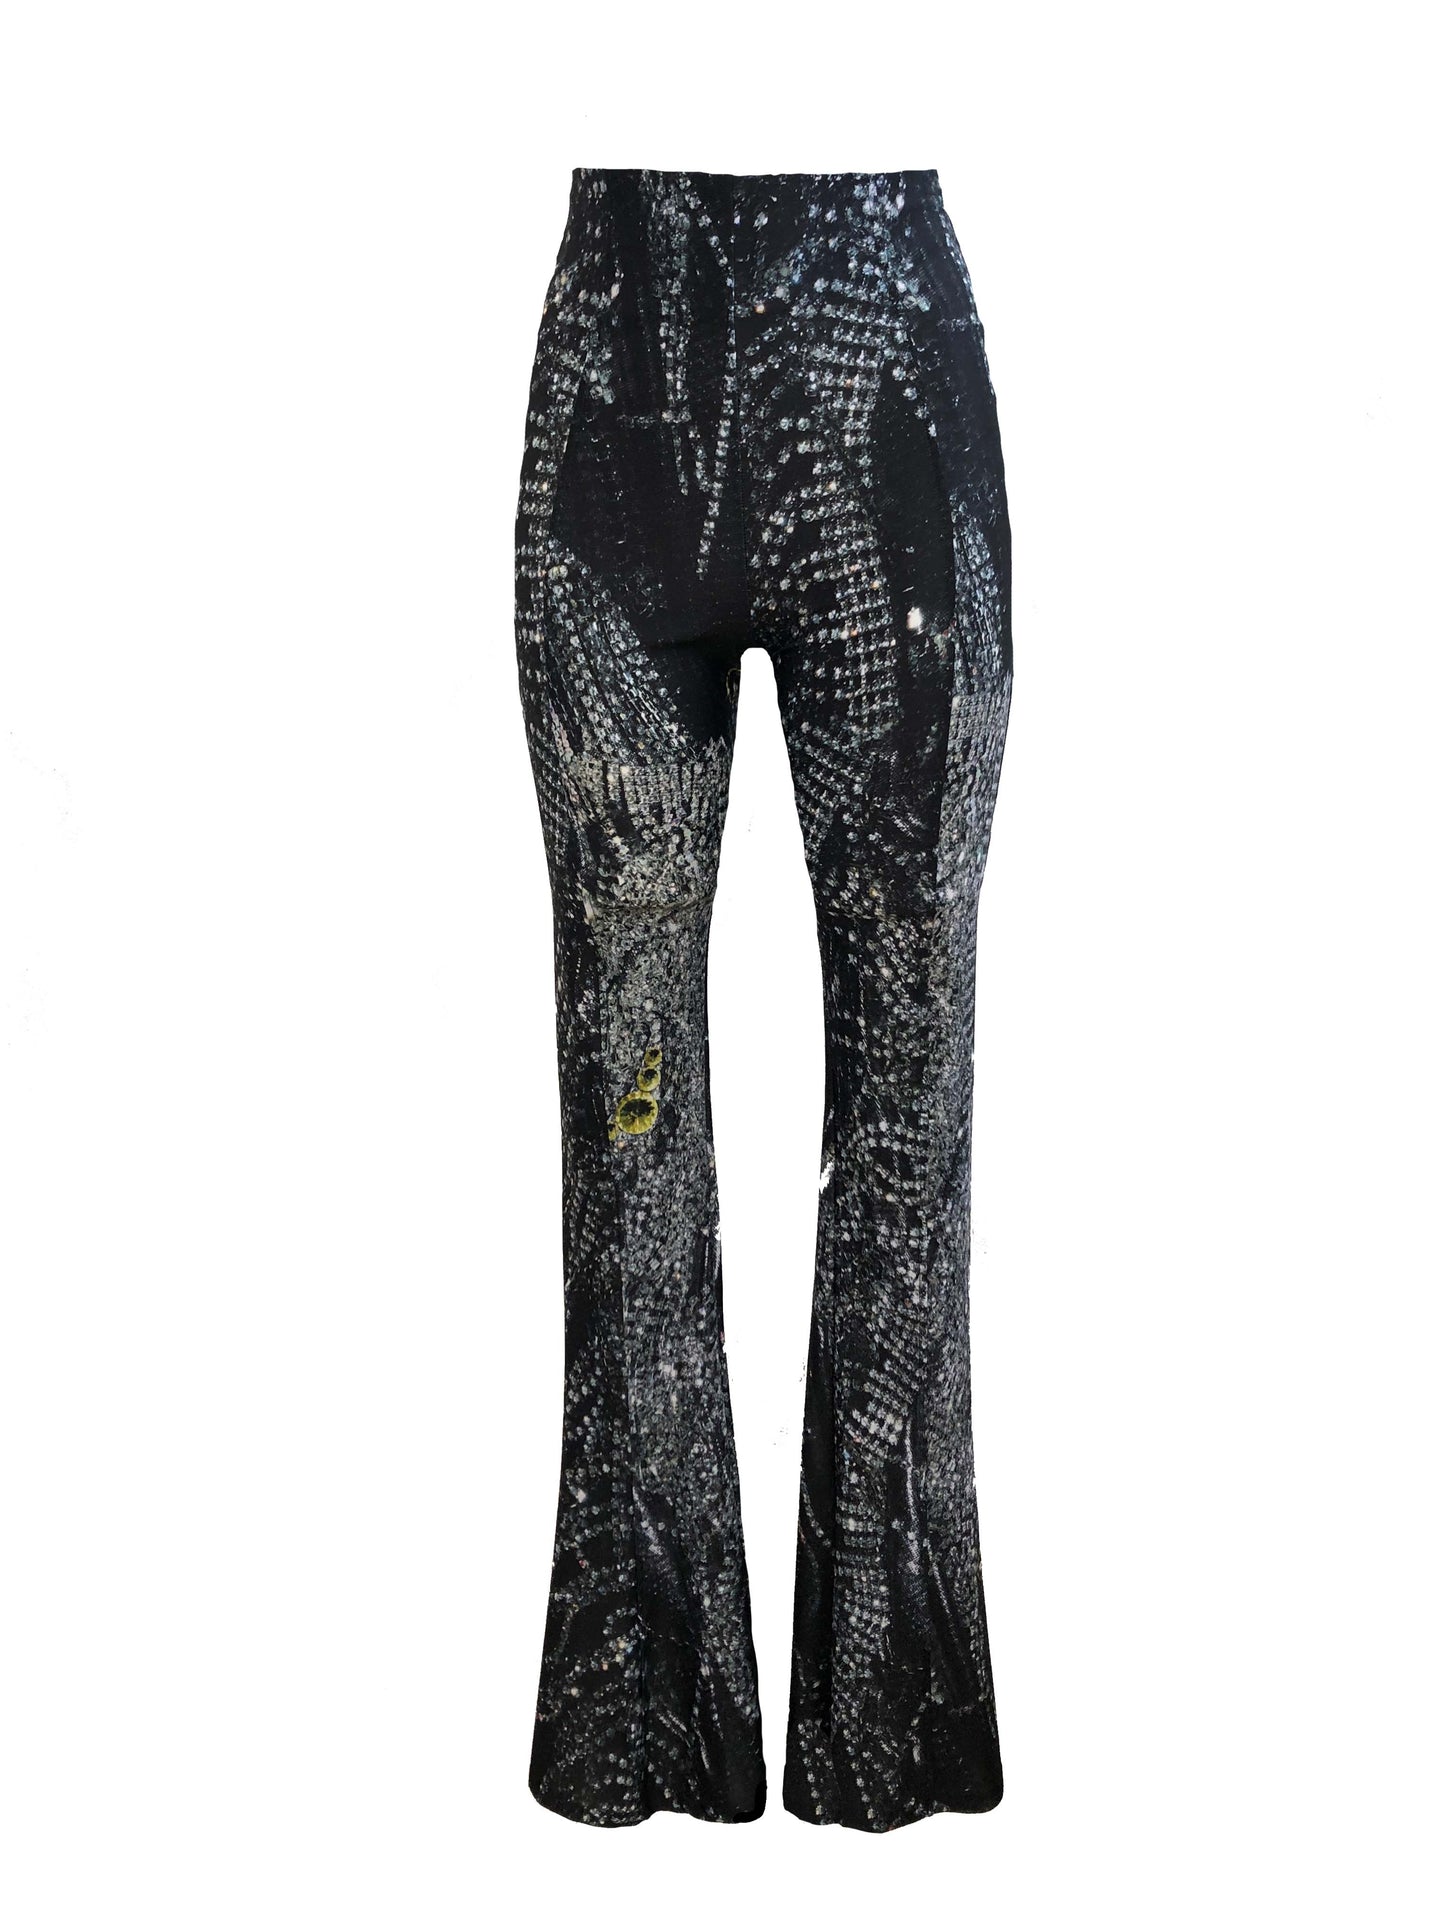 The Black Sparkle Trousers